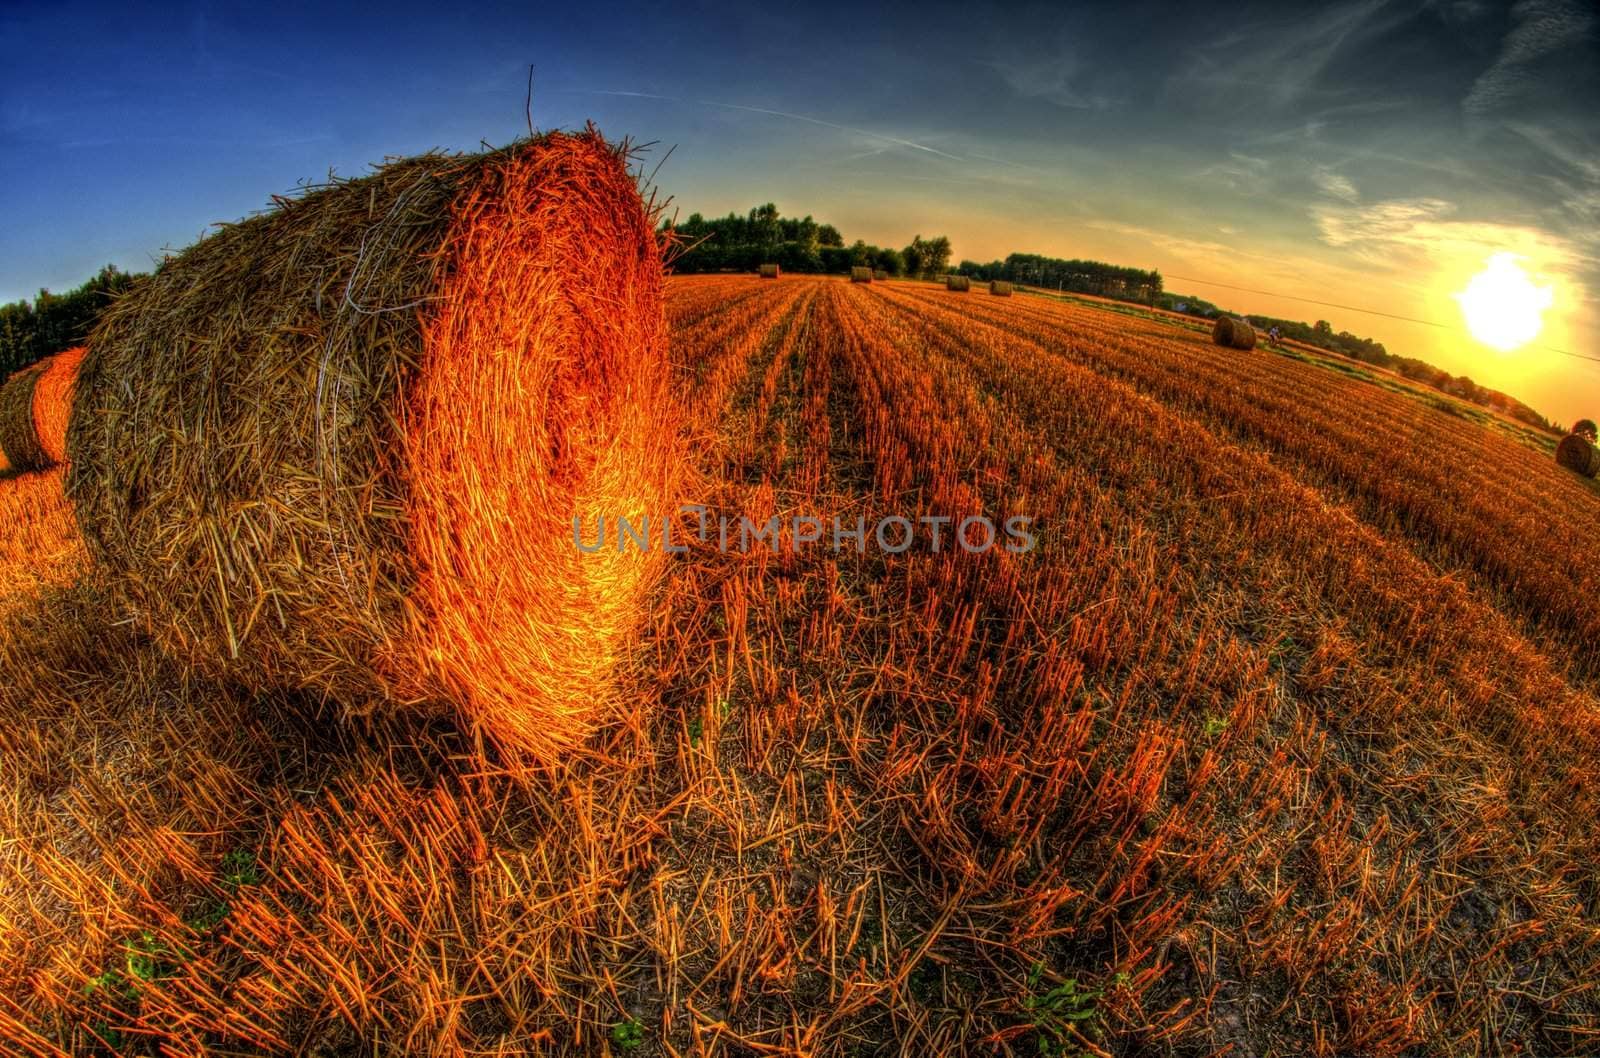 Bales of straw after harvest grain at sunset HDR by PRSchreyner